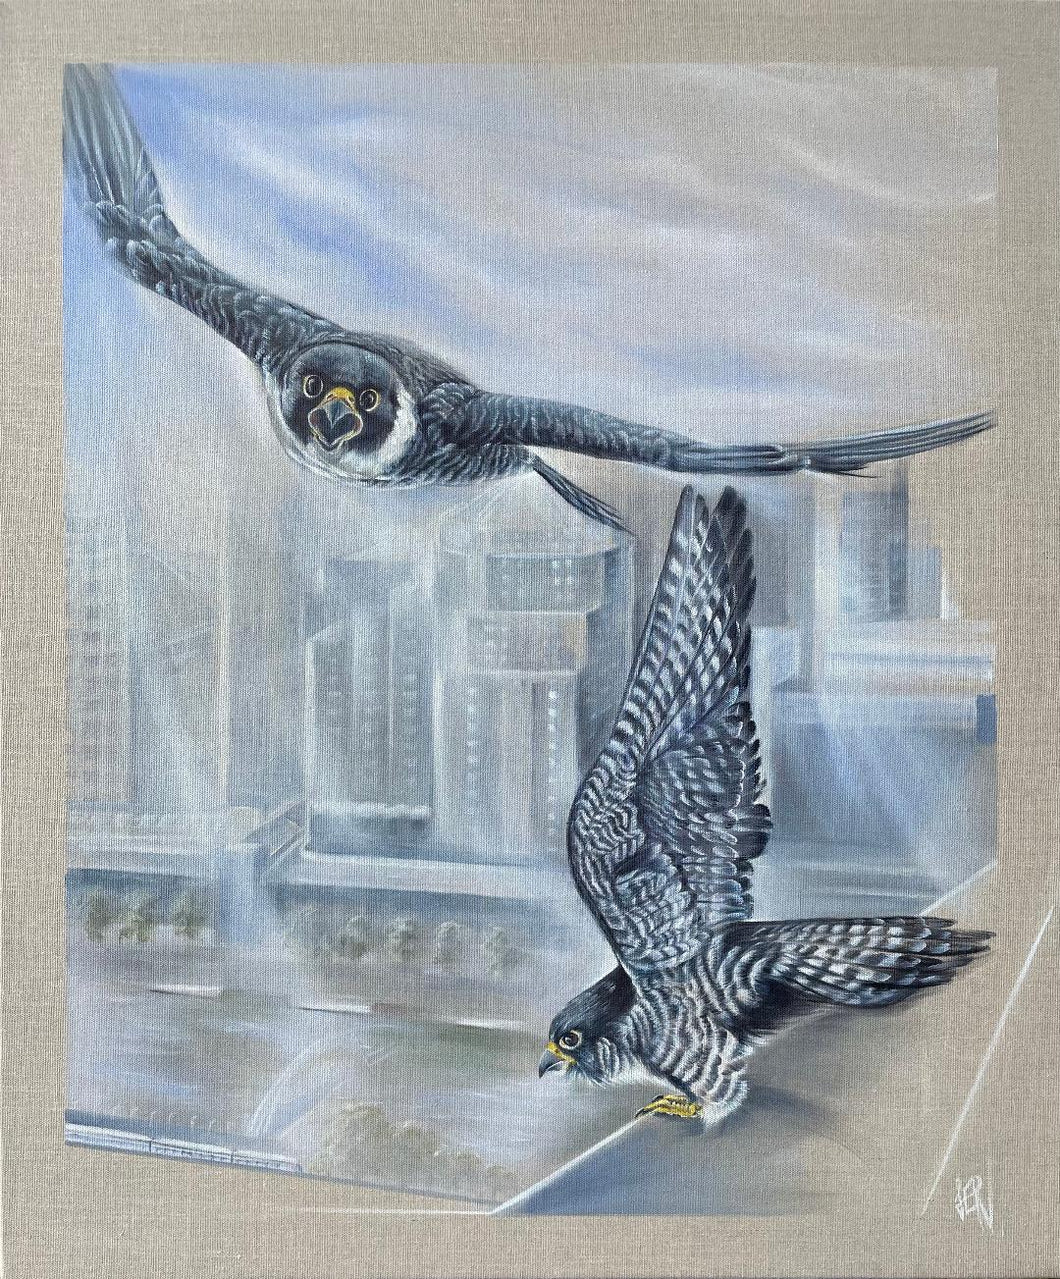 A Tower of Peregrines - Original Oil Painting